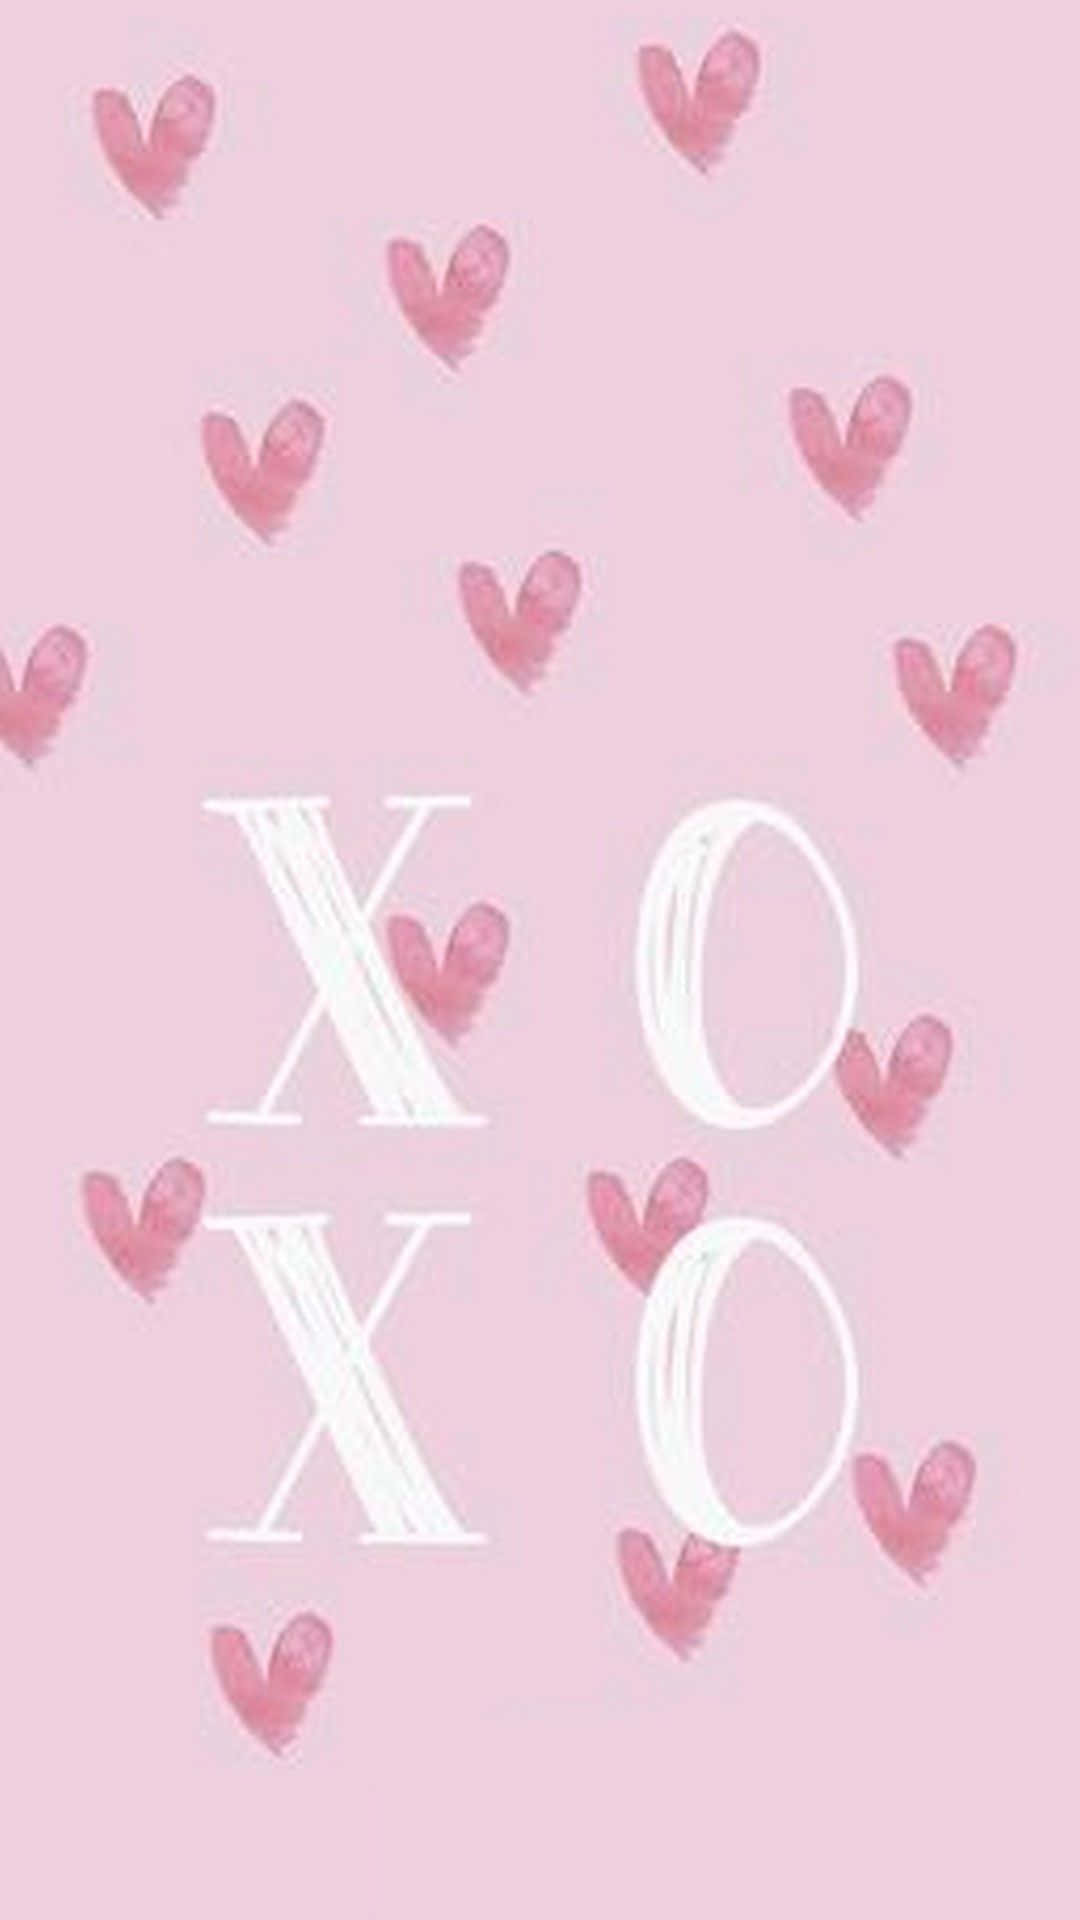 A Pink Background With Hearts And The Word Xoxo Background